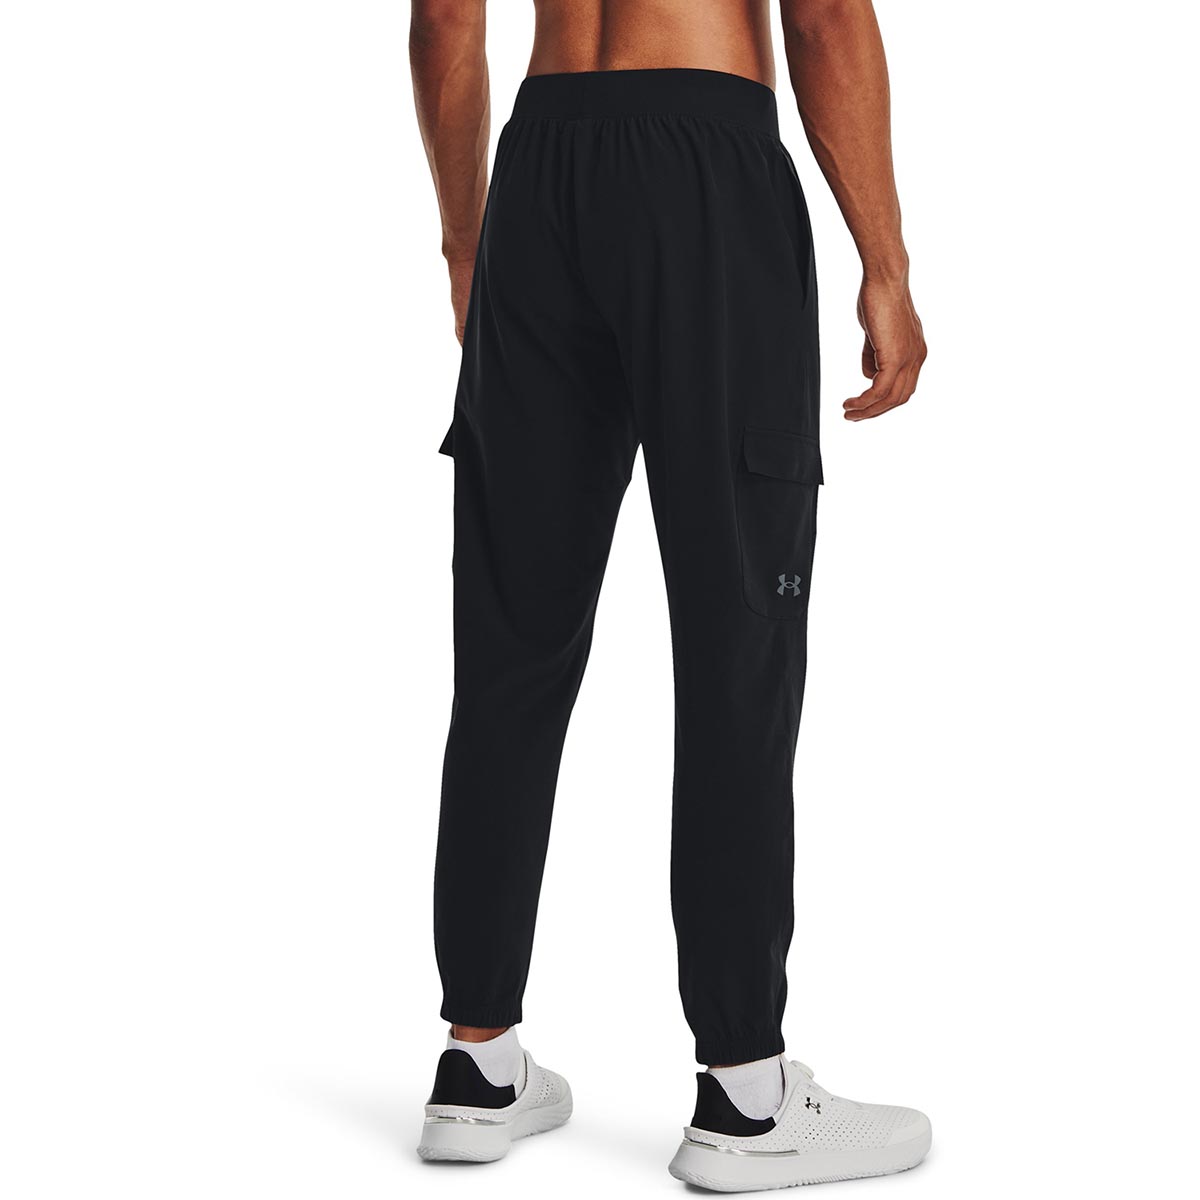 UNDER ARMOUR - STRETCH WOVEN CARGO PANTS